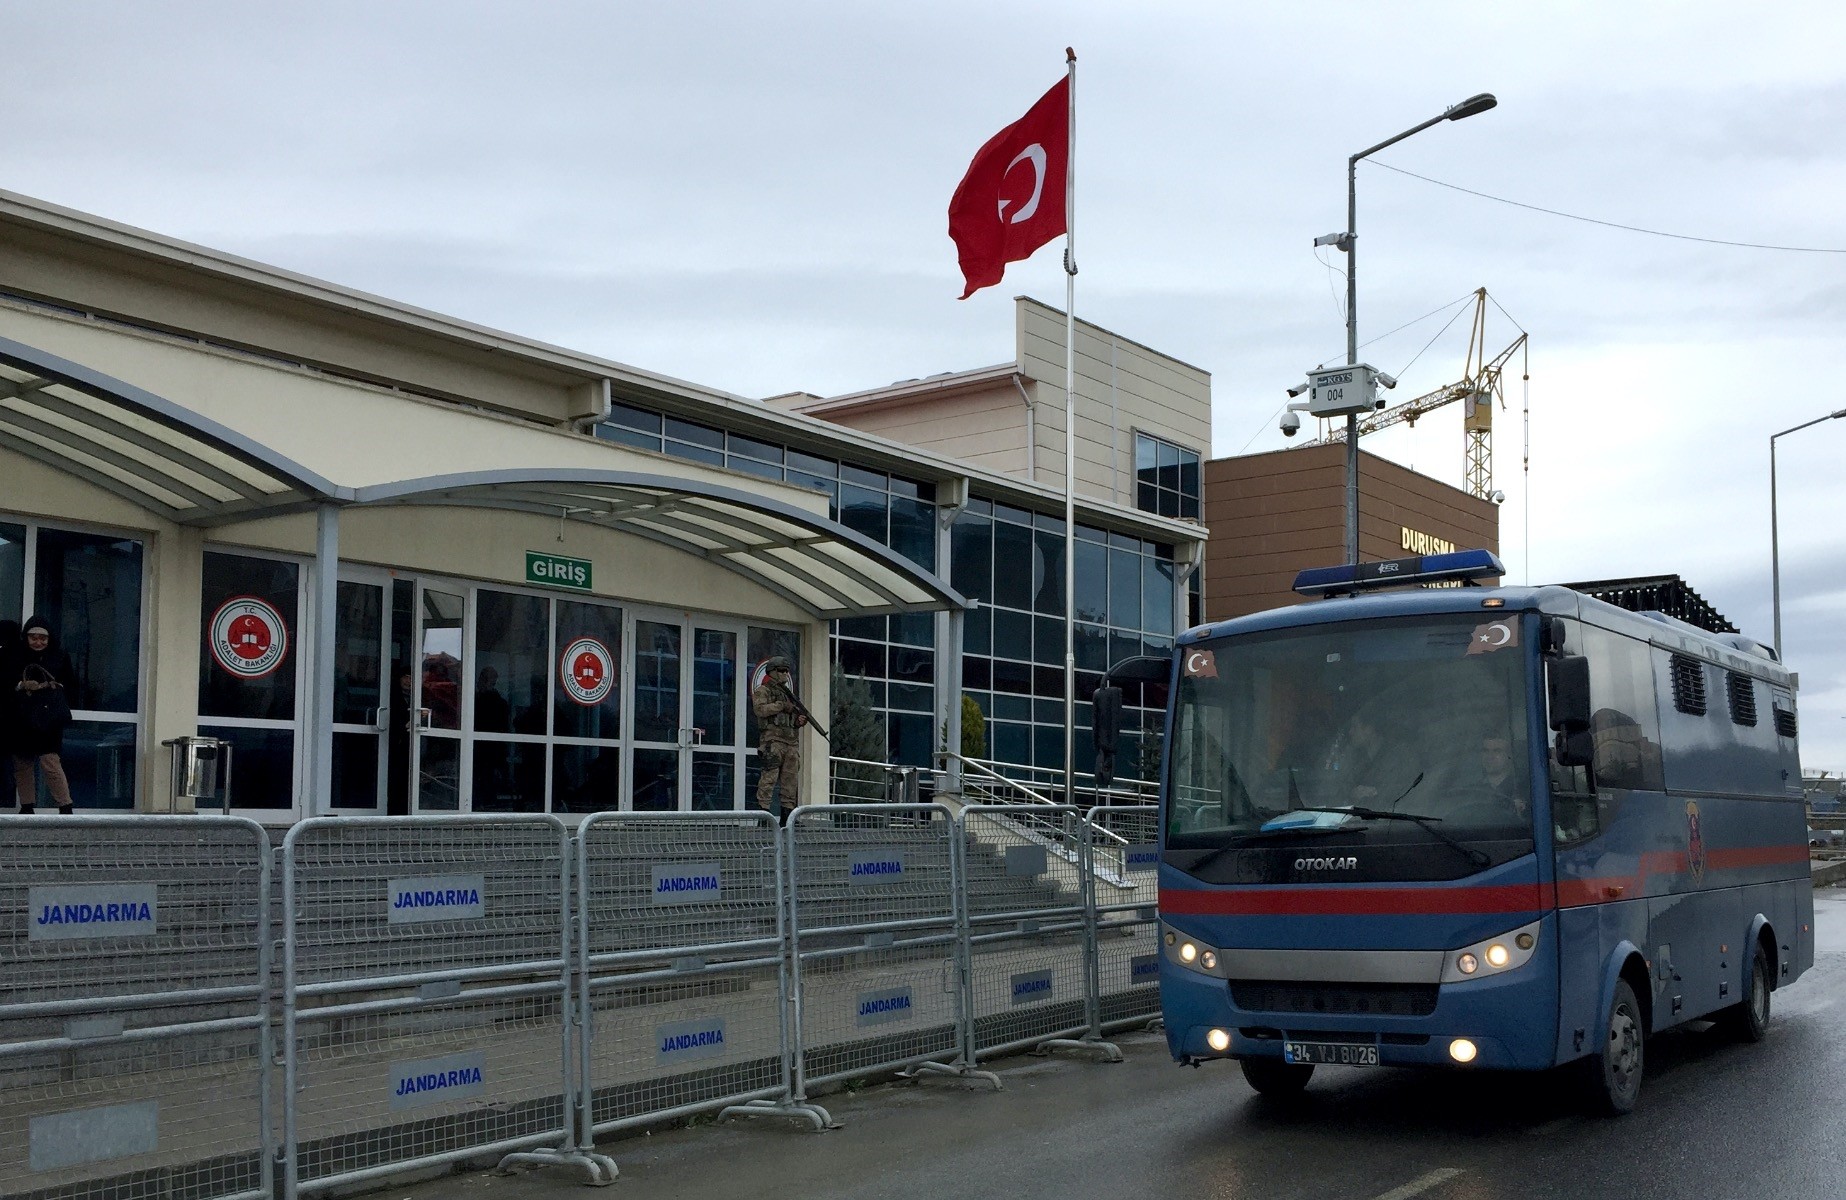 A prison van parked outside the courthouse in Silivri where major coup trials in Istanbul are being held. Hundreds were implicated in the trials on the coup attempt that killed 249 people across the country in 2016. 